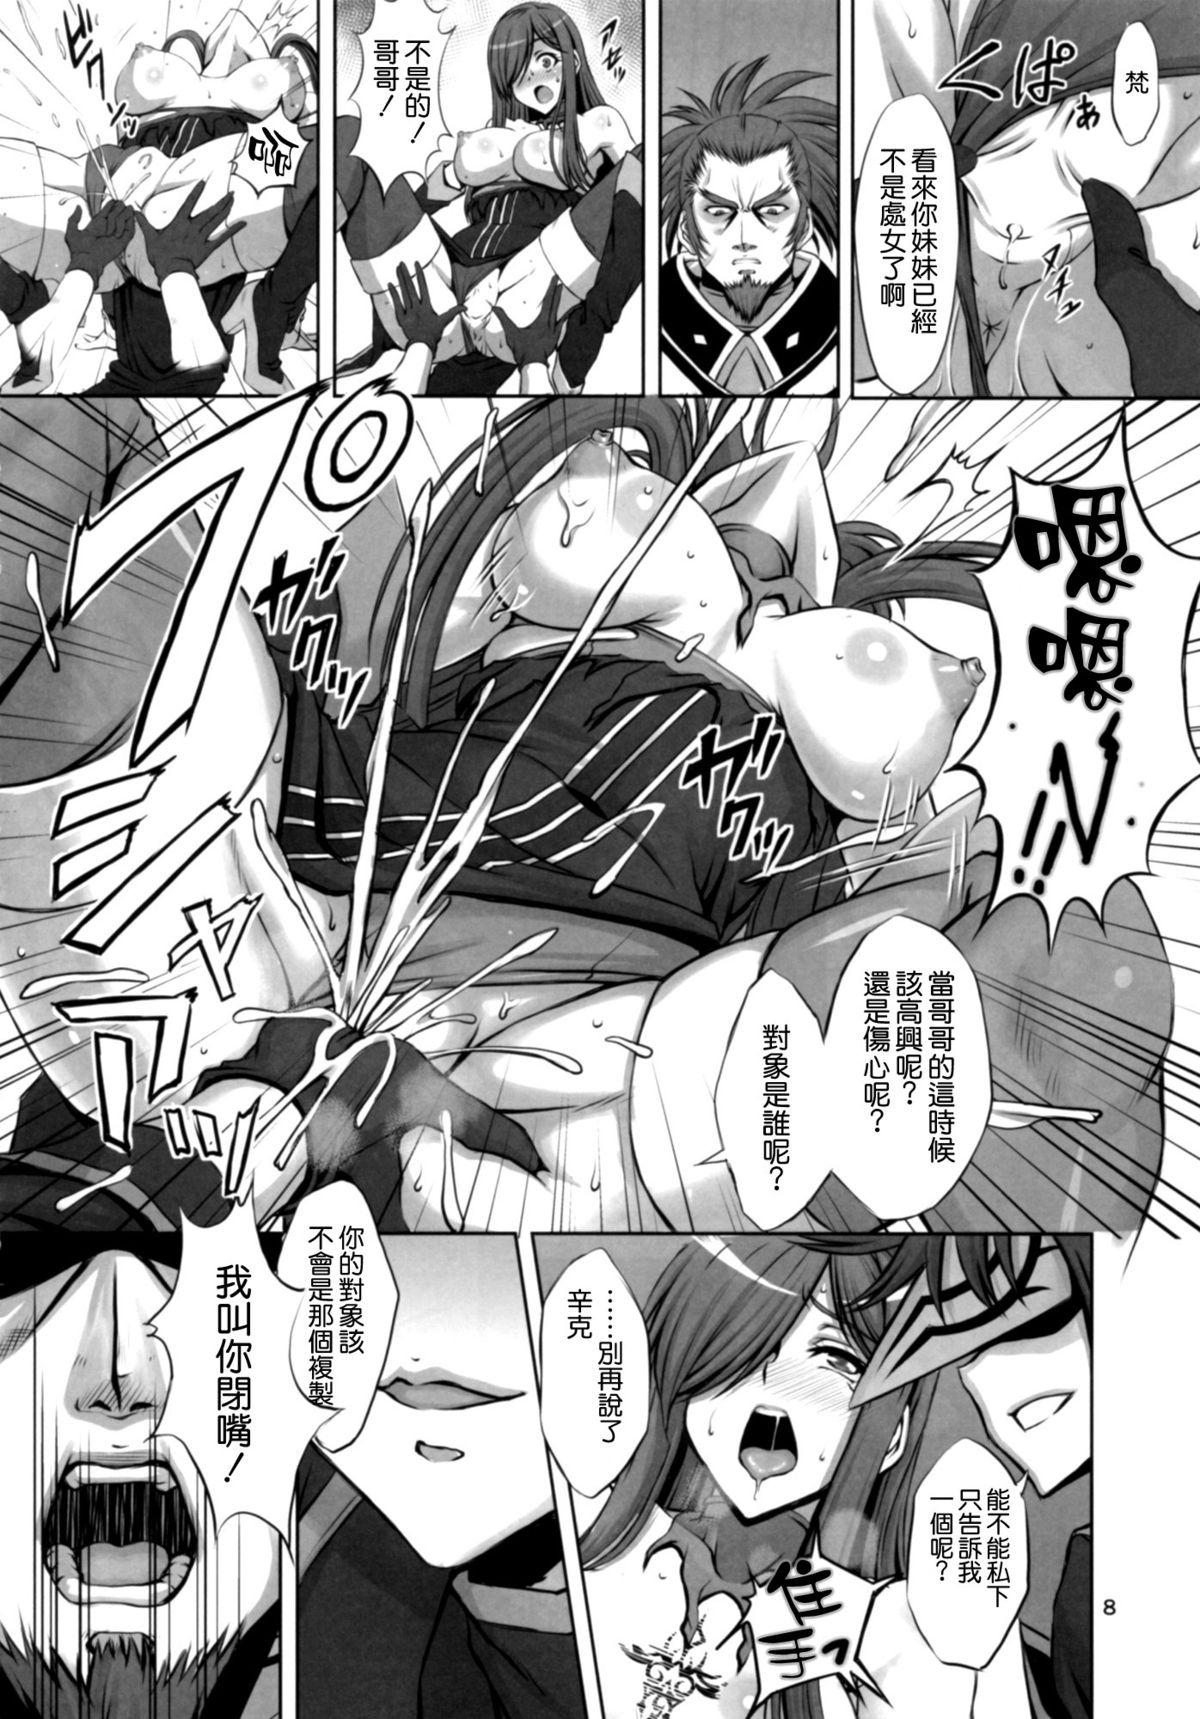 Teenporno Shin ◎ - Tales of the abyss Matures - Page 8